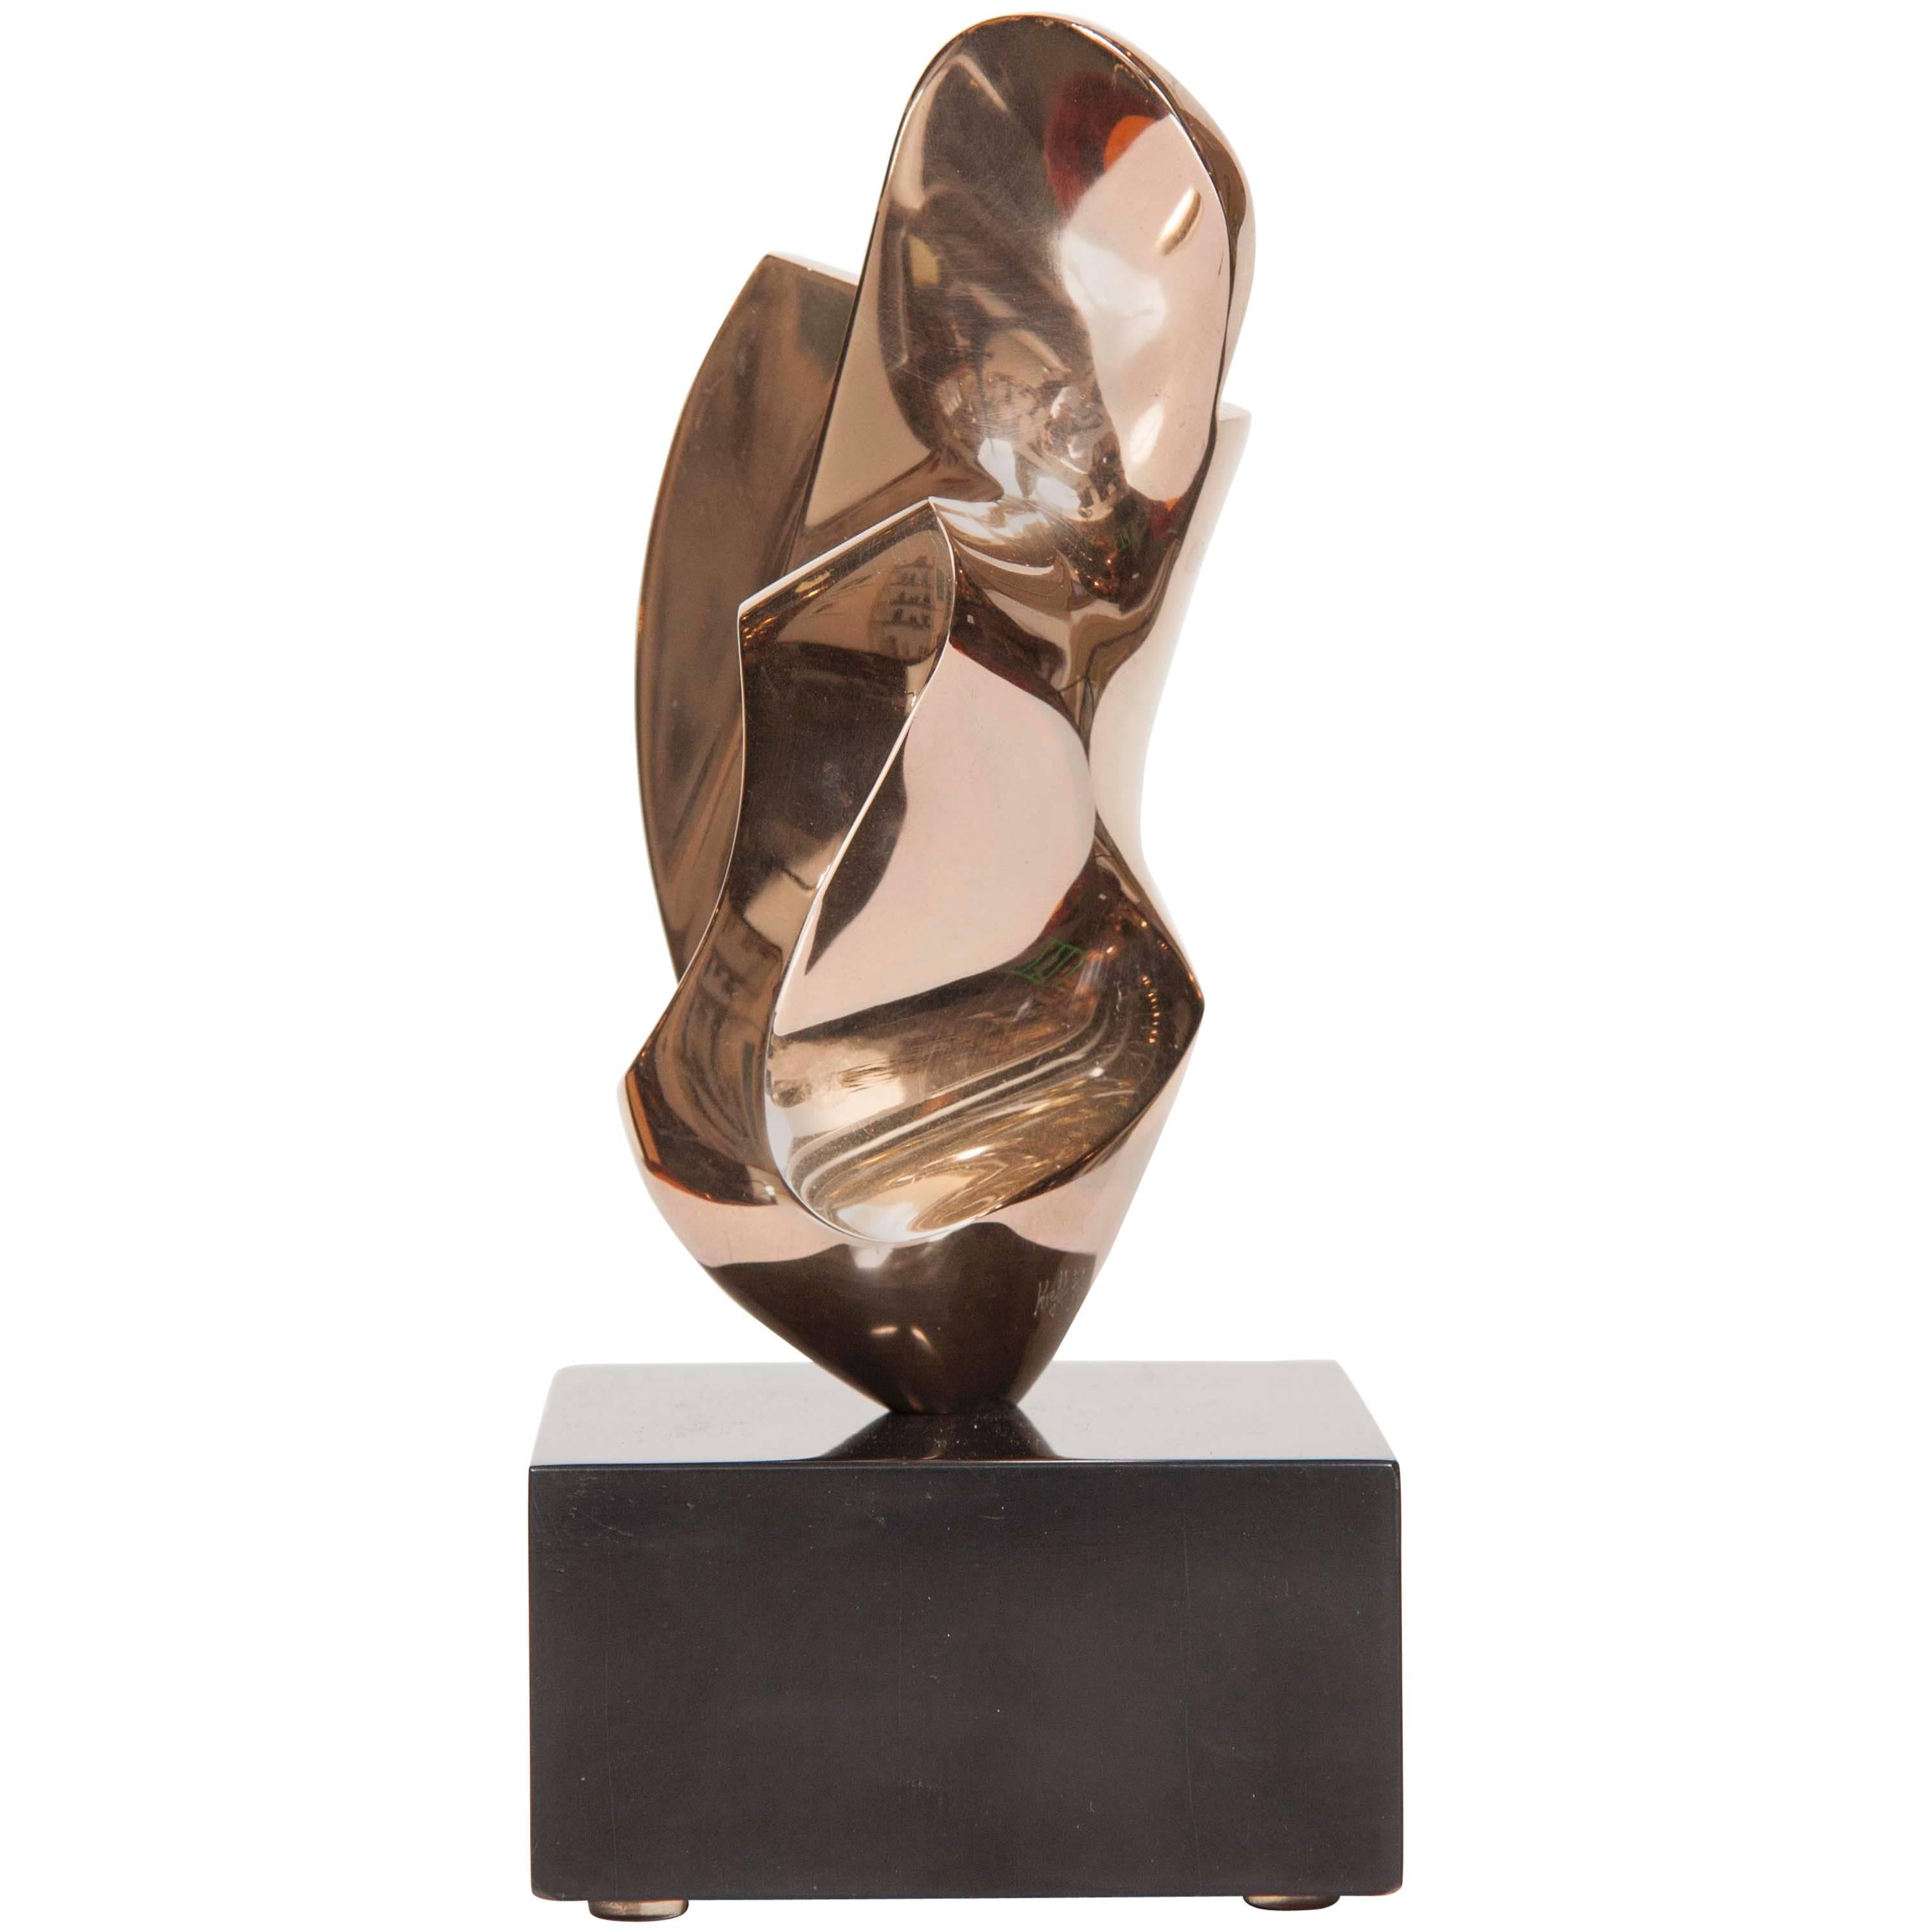 Bronze Abstract Sculpture by Antonio Grediaga Kieff, Signed and Numbered 5/9